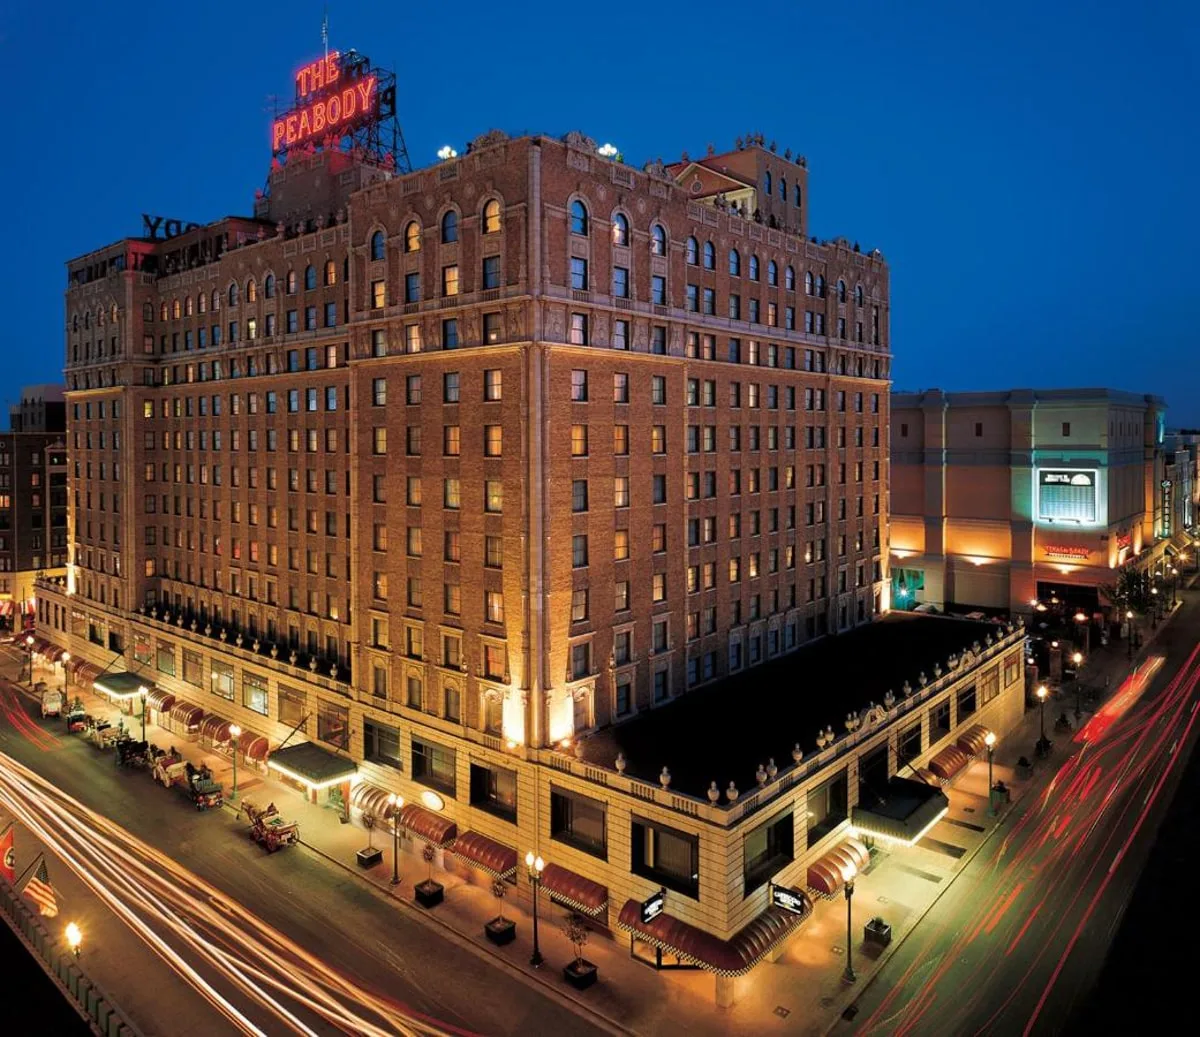 the exterior of the peabody hotel at night in memphis 